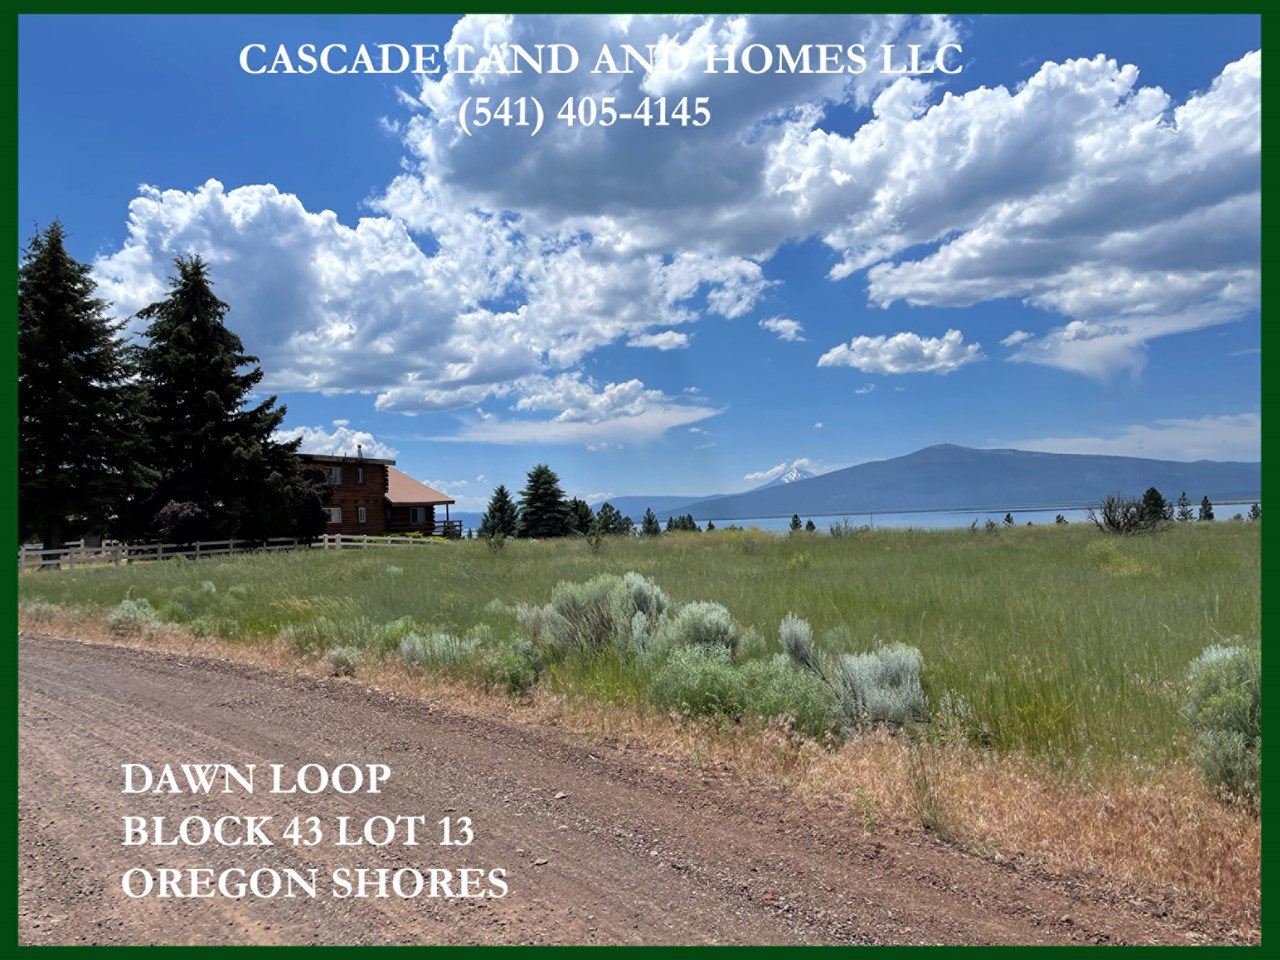 this photo was taken from the lot looking across the street. this is an area of nice homes and beautiful views!